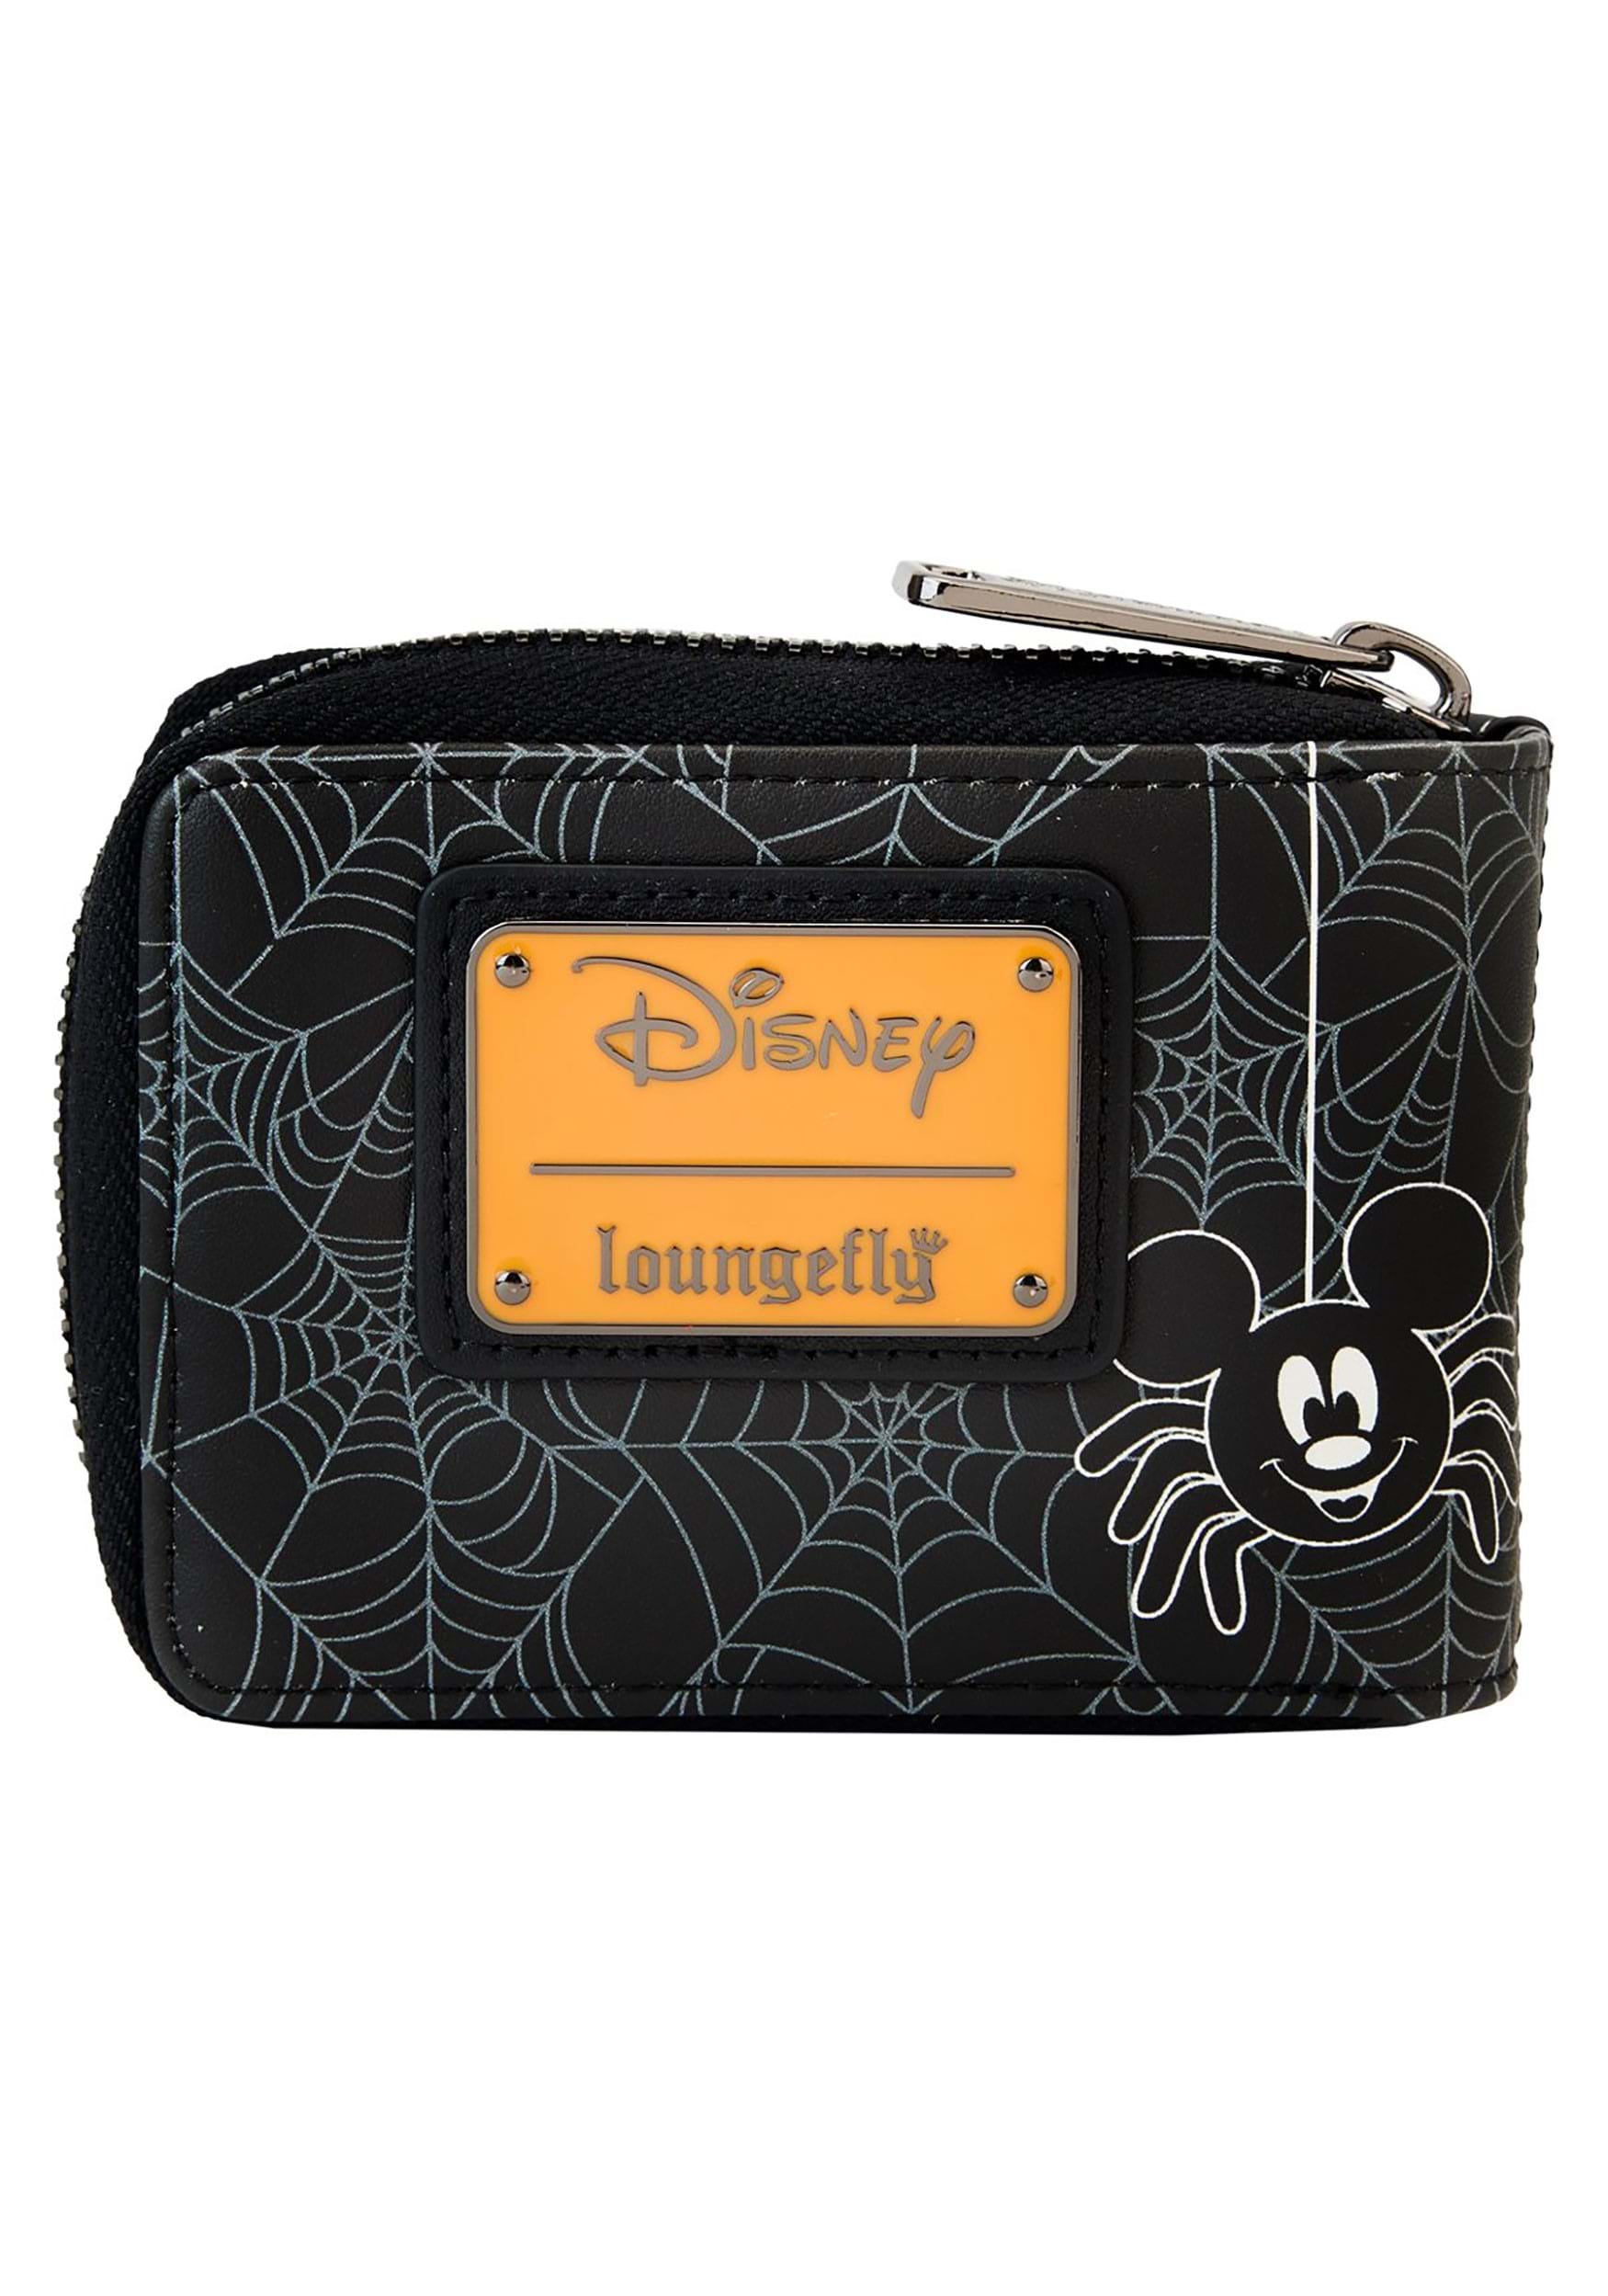 Loungefly Disney Minnie Mouse Spider Glow Accordion Wallet